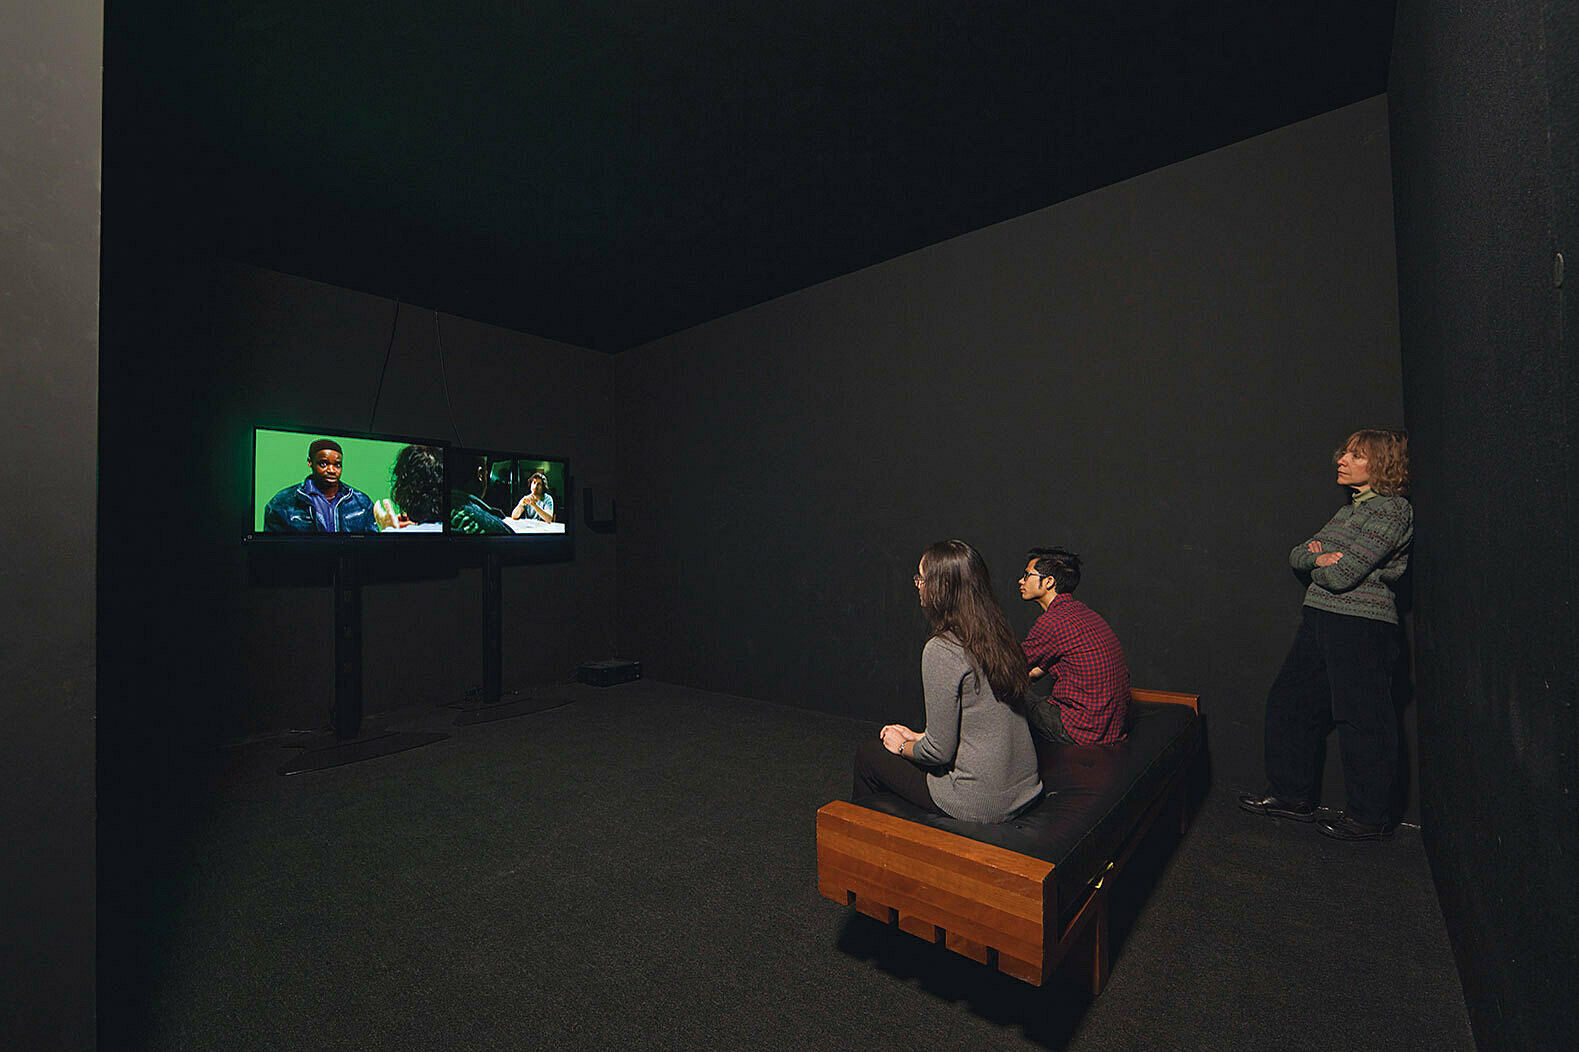 Visitors watching an Omer Fast video in a dark room